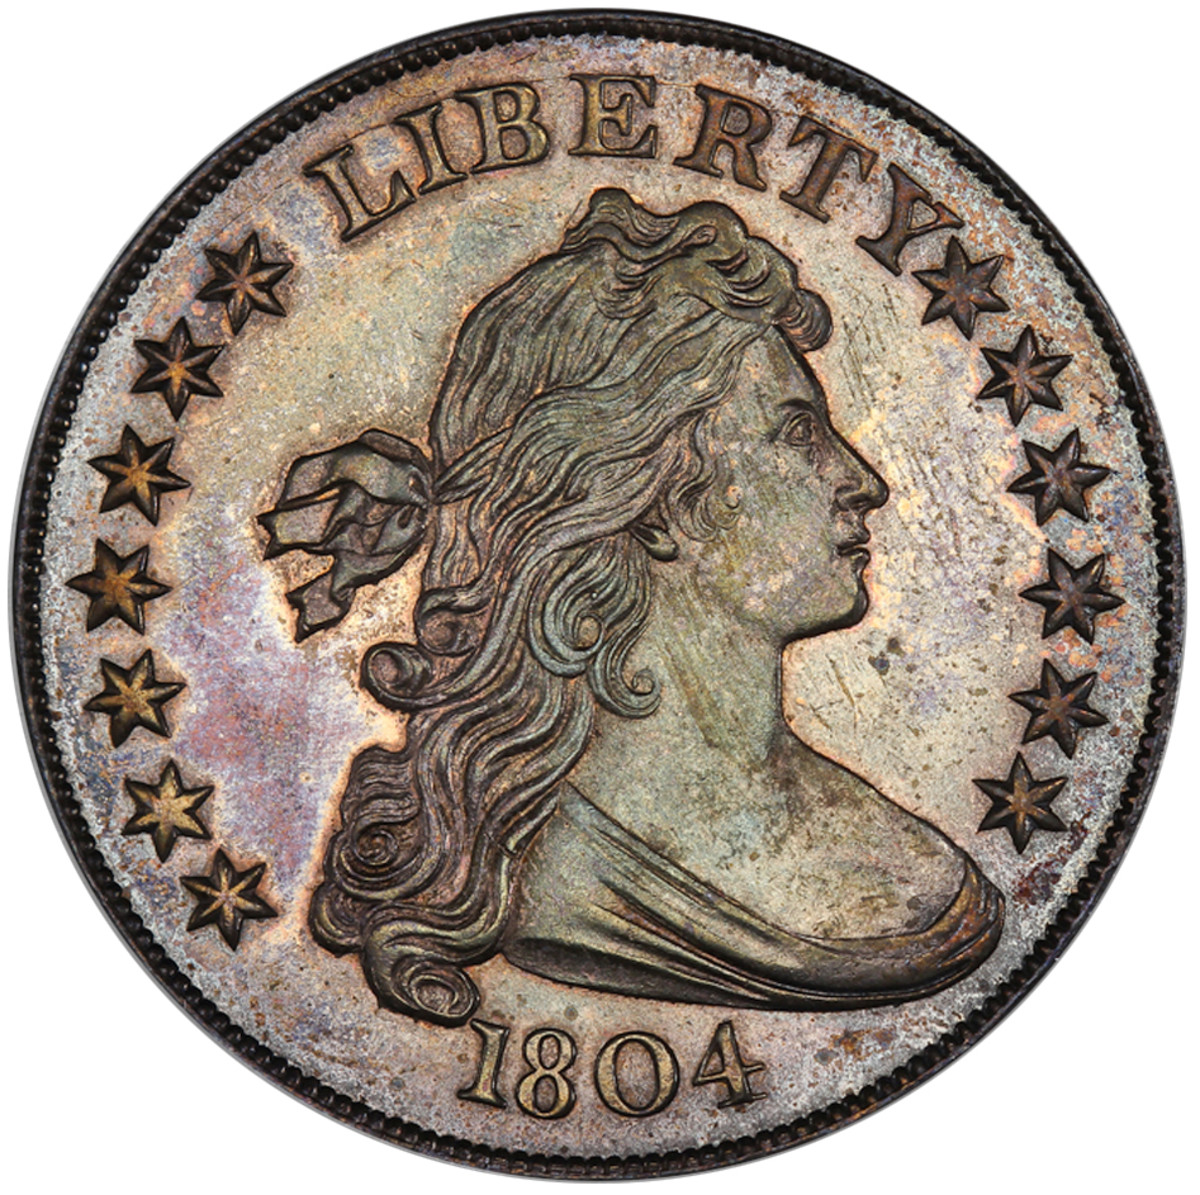 The James Dexter example of the infamous “King of Coins,” an 1804 silver dollar.